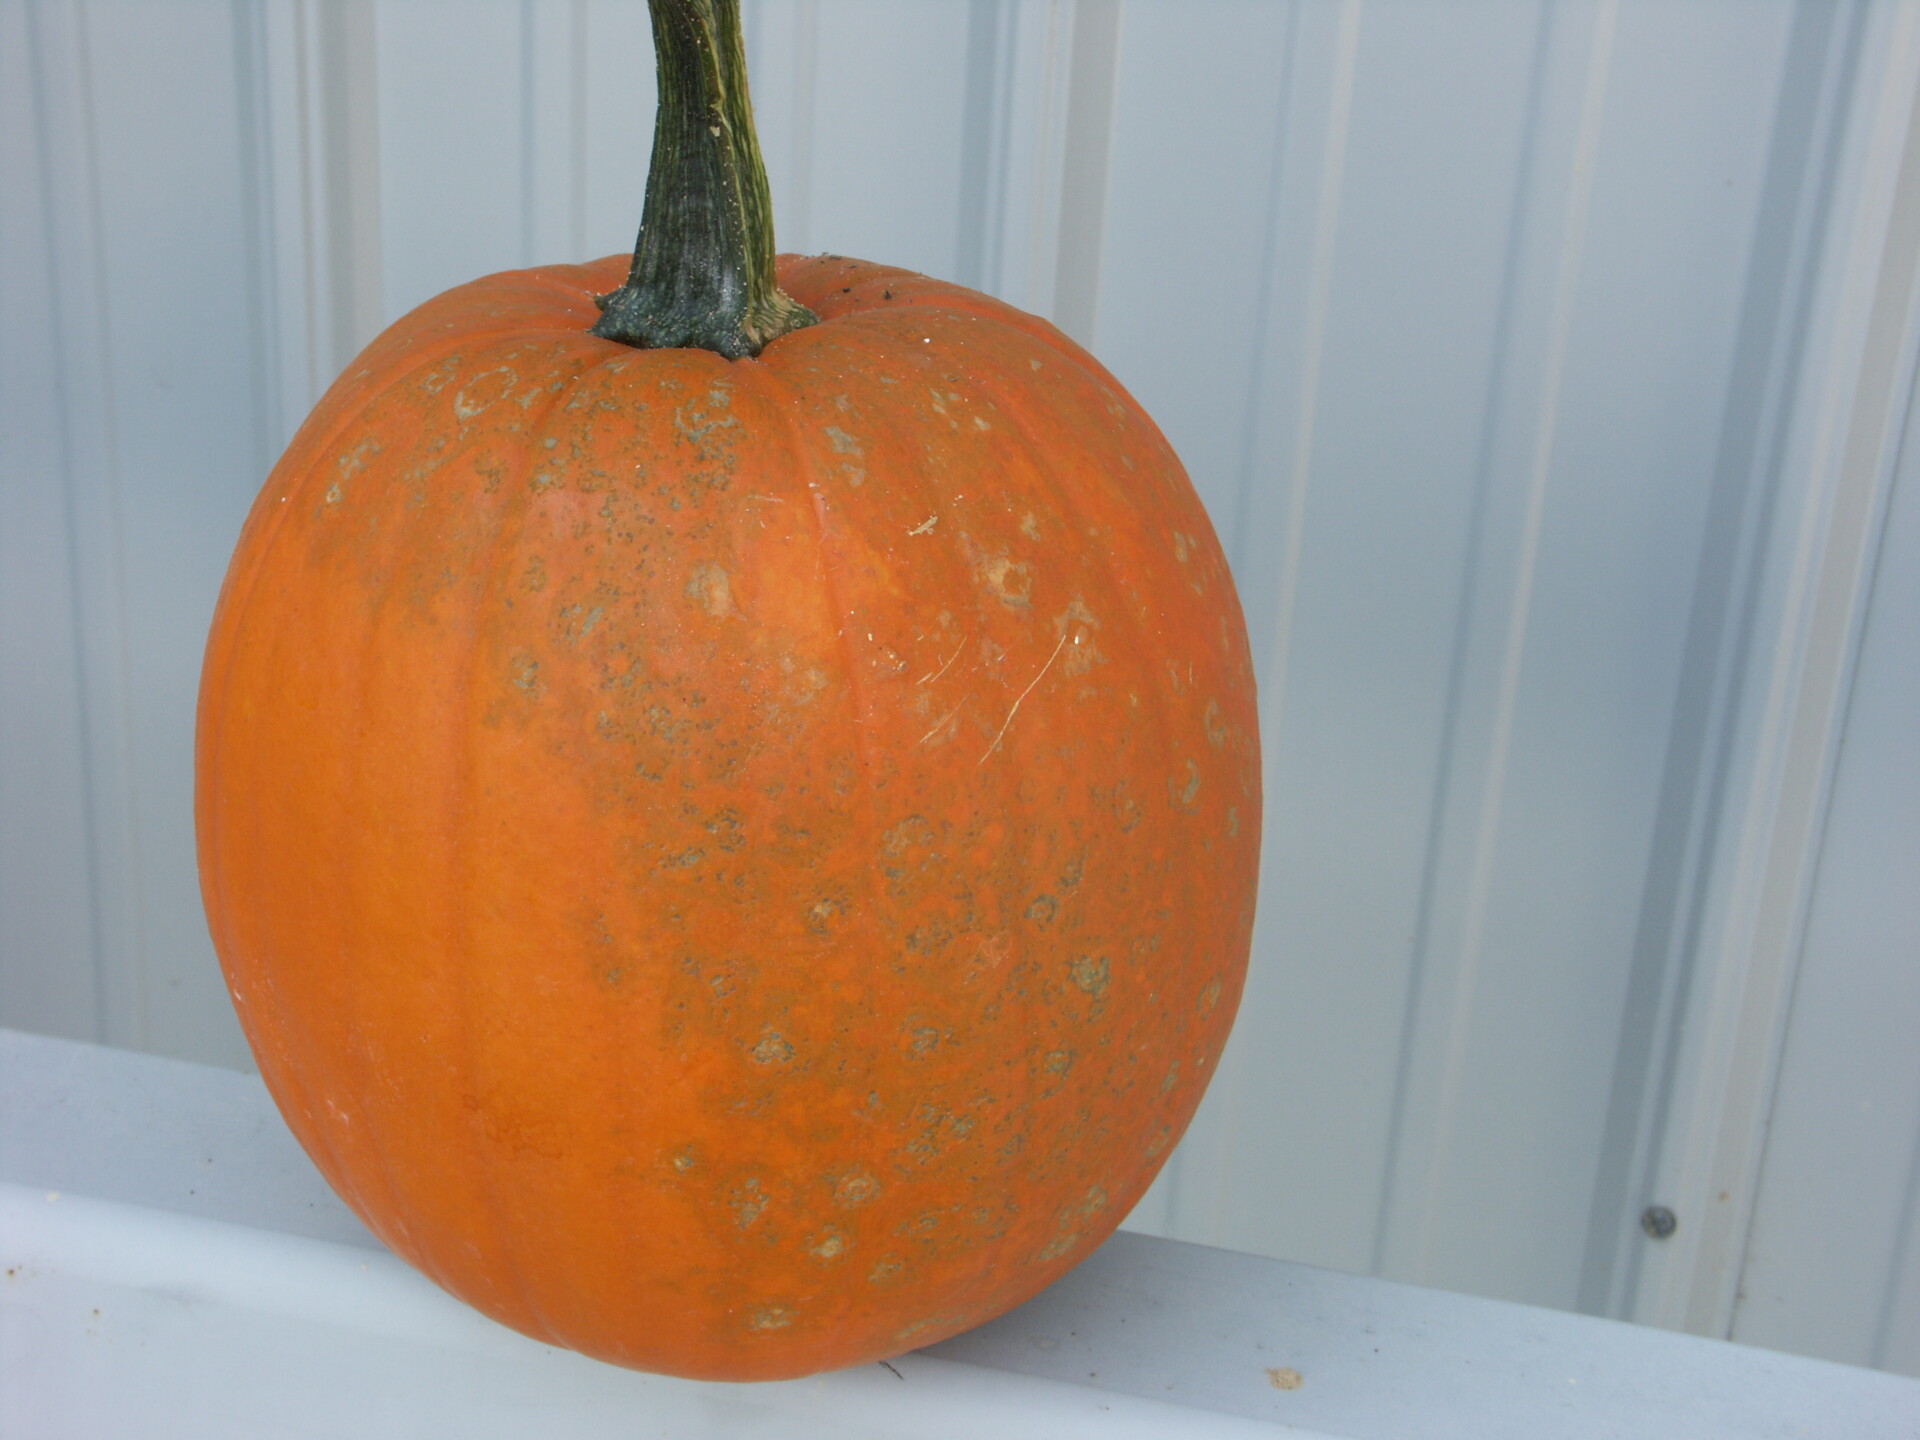 his pumpkin test positive for Watermelon mosaic virus 2 and zucchini mosaic virus, both poty viruses. Note the sunken, gray, mostly circular lesions.